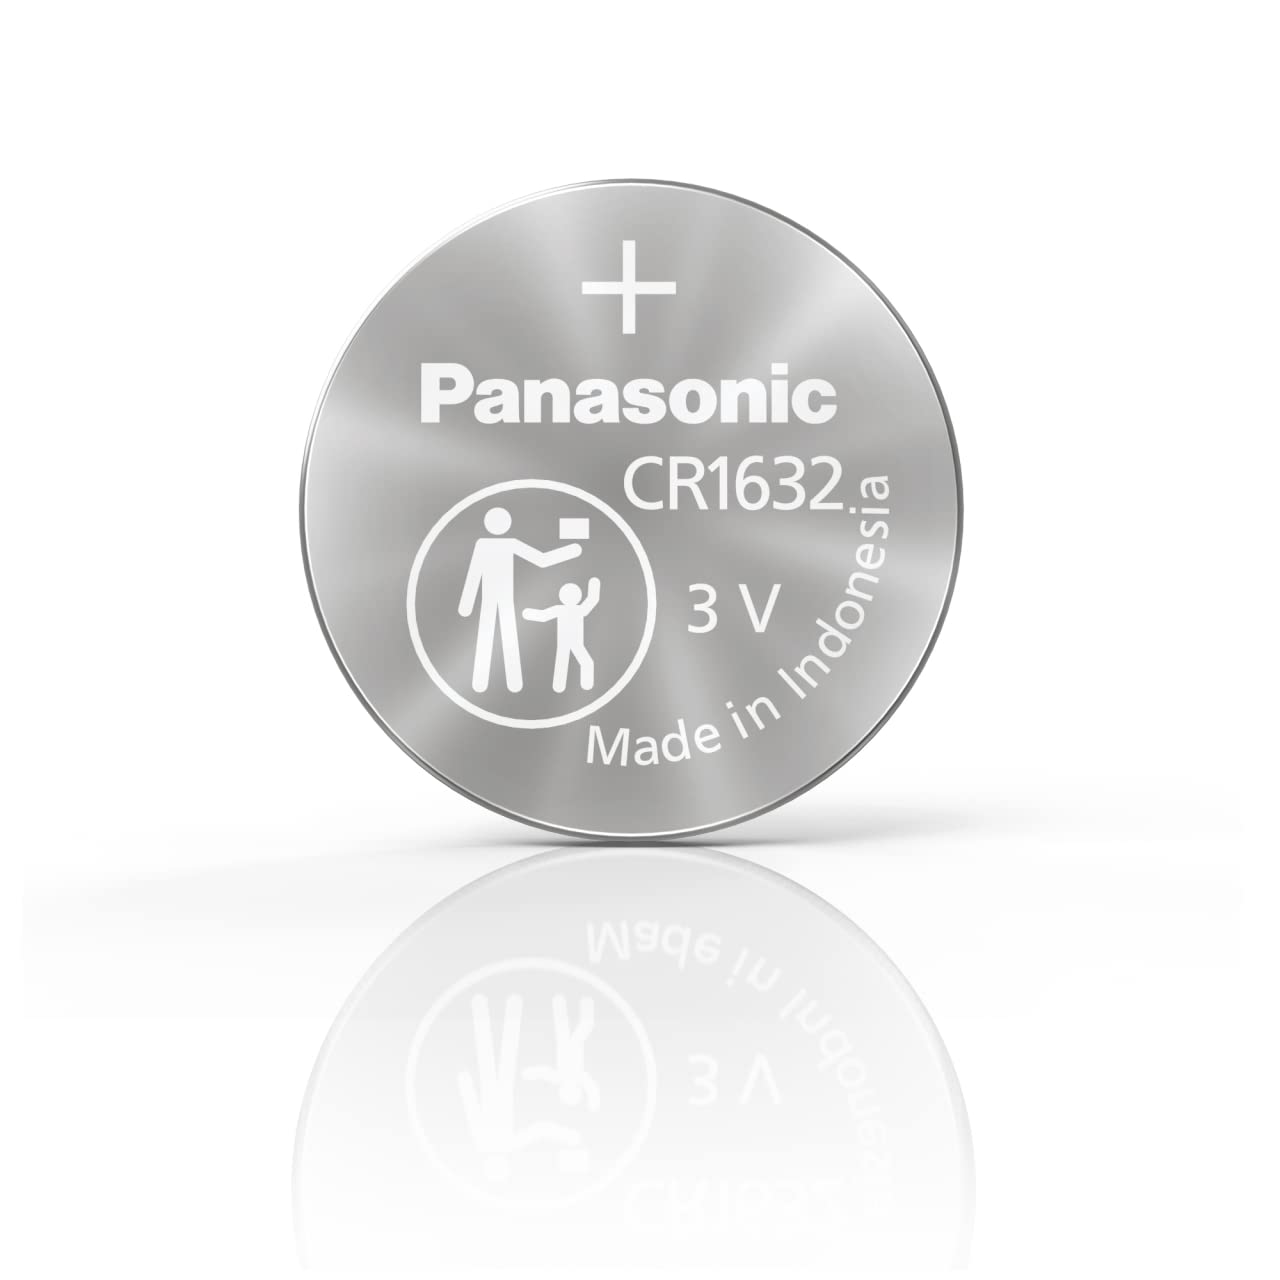 Panasonic CR1632 3.0 Volt Long Lasting Lithium Coin Cell Batteries in Child Resistant, Standards Based Packaging, 4-Battery Pack